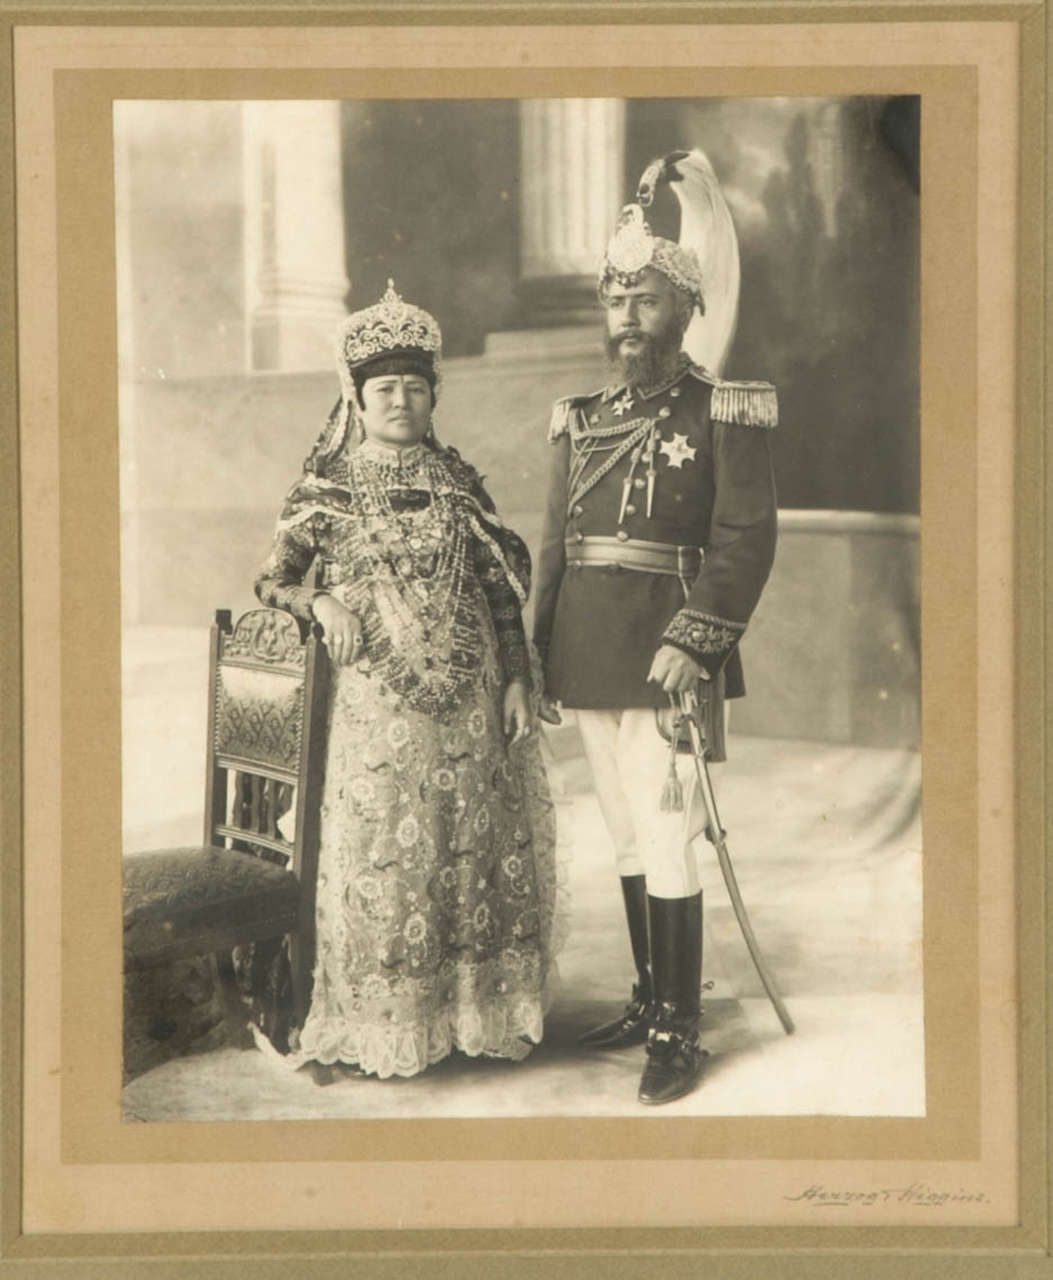 Early 20th Century Vintage Photography of a Maharaja by Herzog et Higgins circa 1910-1920